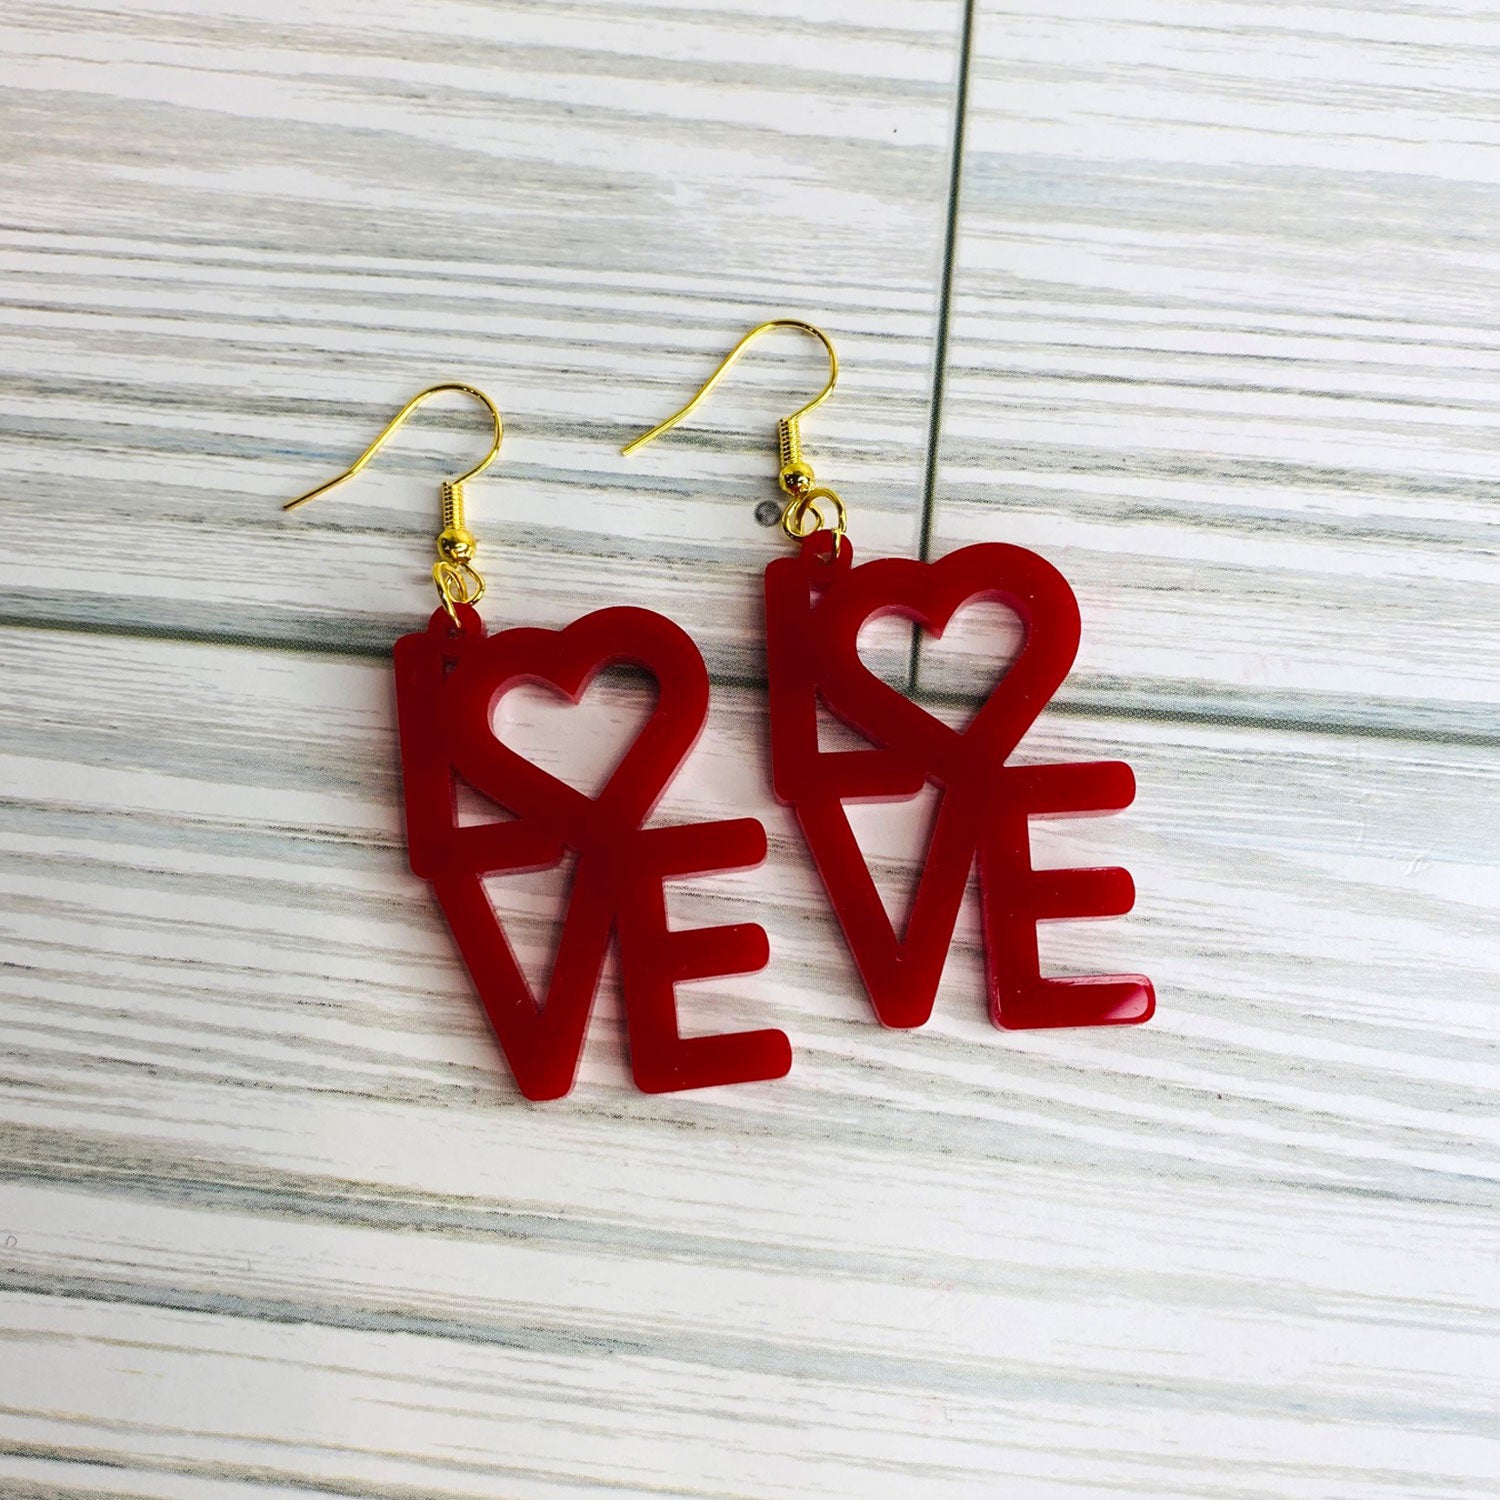 Valentine Crafts - DIY Necklace with Earrings Valentine Gift Idea - YouTube